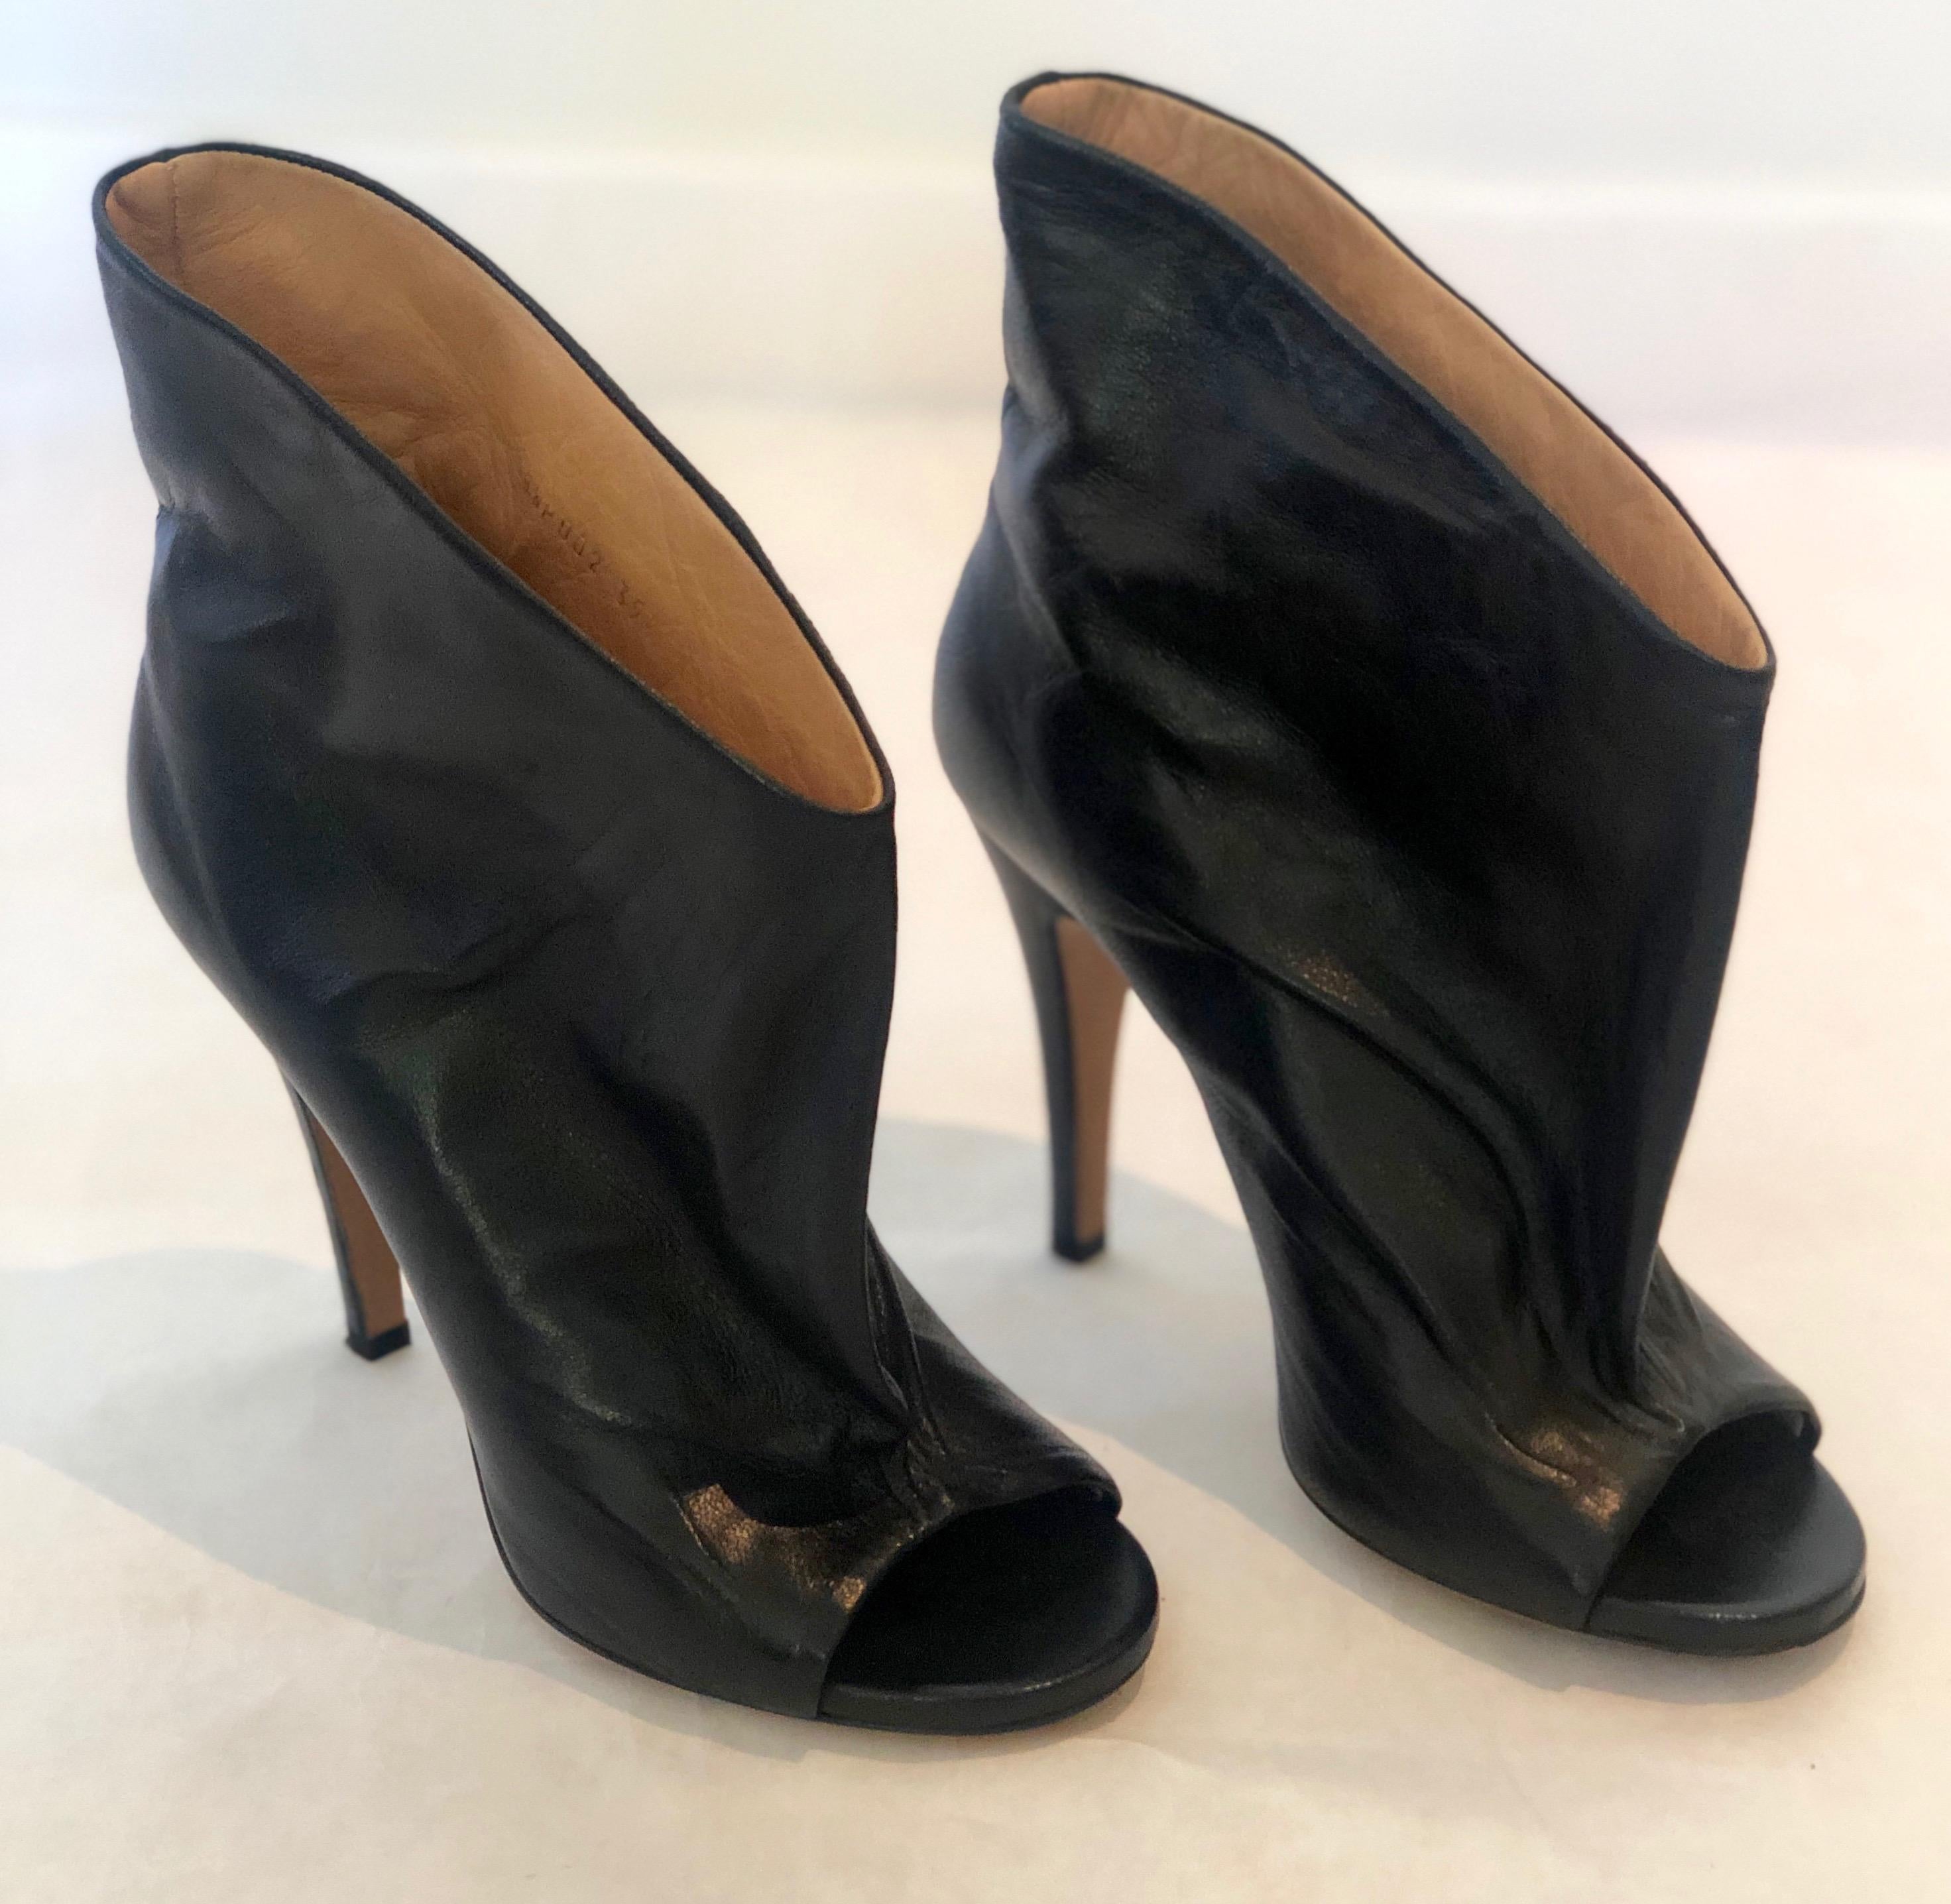 Pair of Maison Martin Margiala Black Open Toe Ankle Boots w/ Wide Unfitted Top  In Good Condition For Sale In Houston, TX